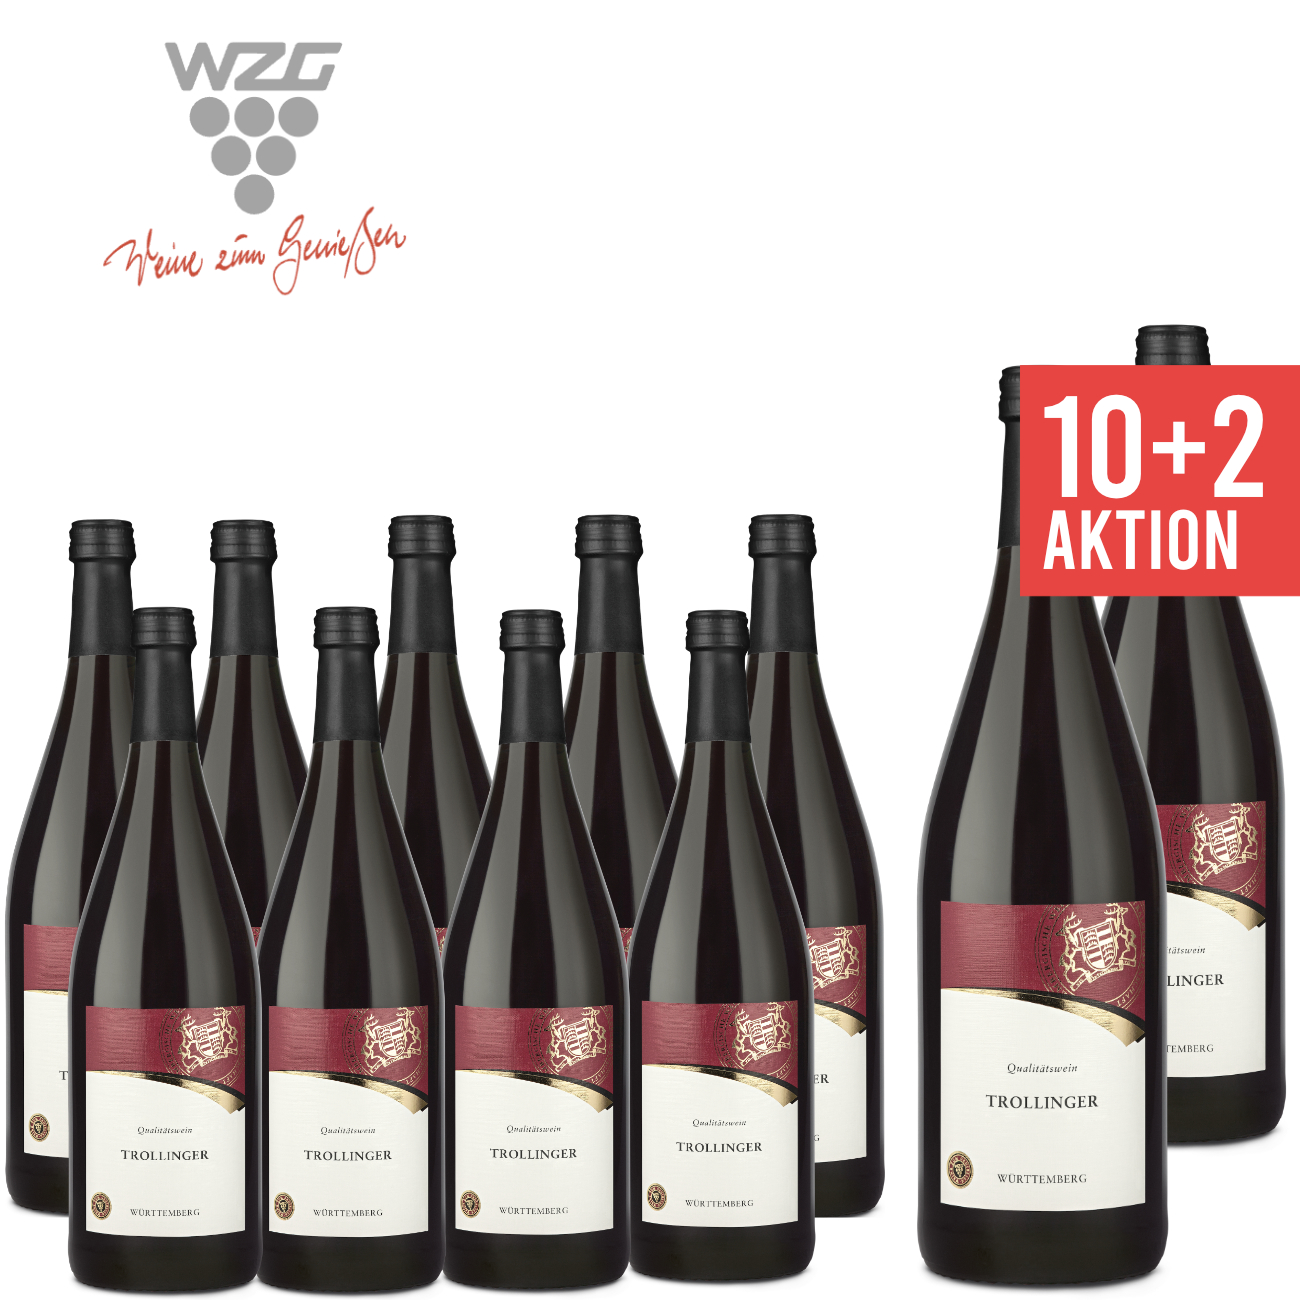 | wines wein.plus of Find+Buy members The Find+Buy: our wein.plus